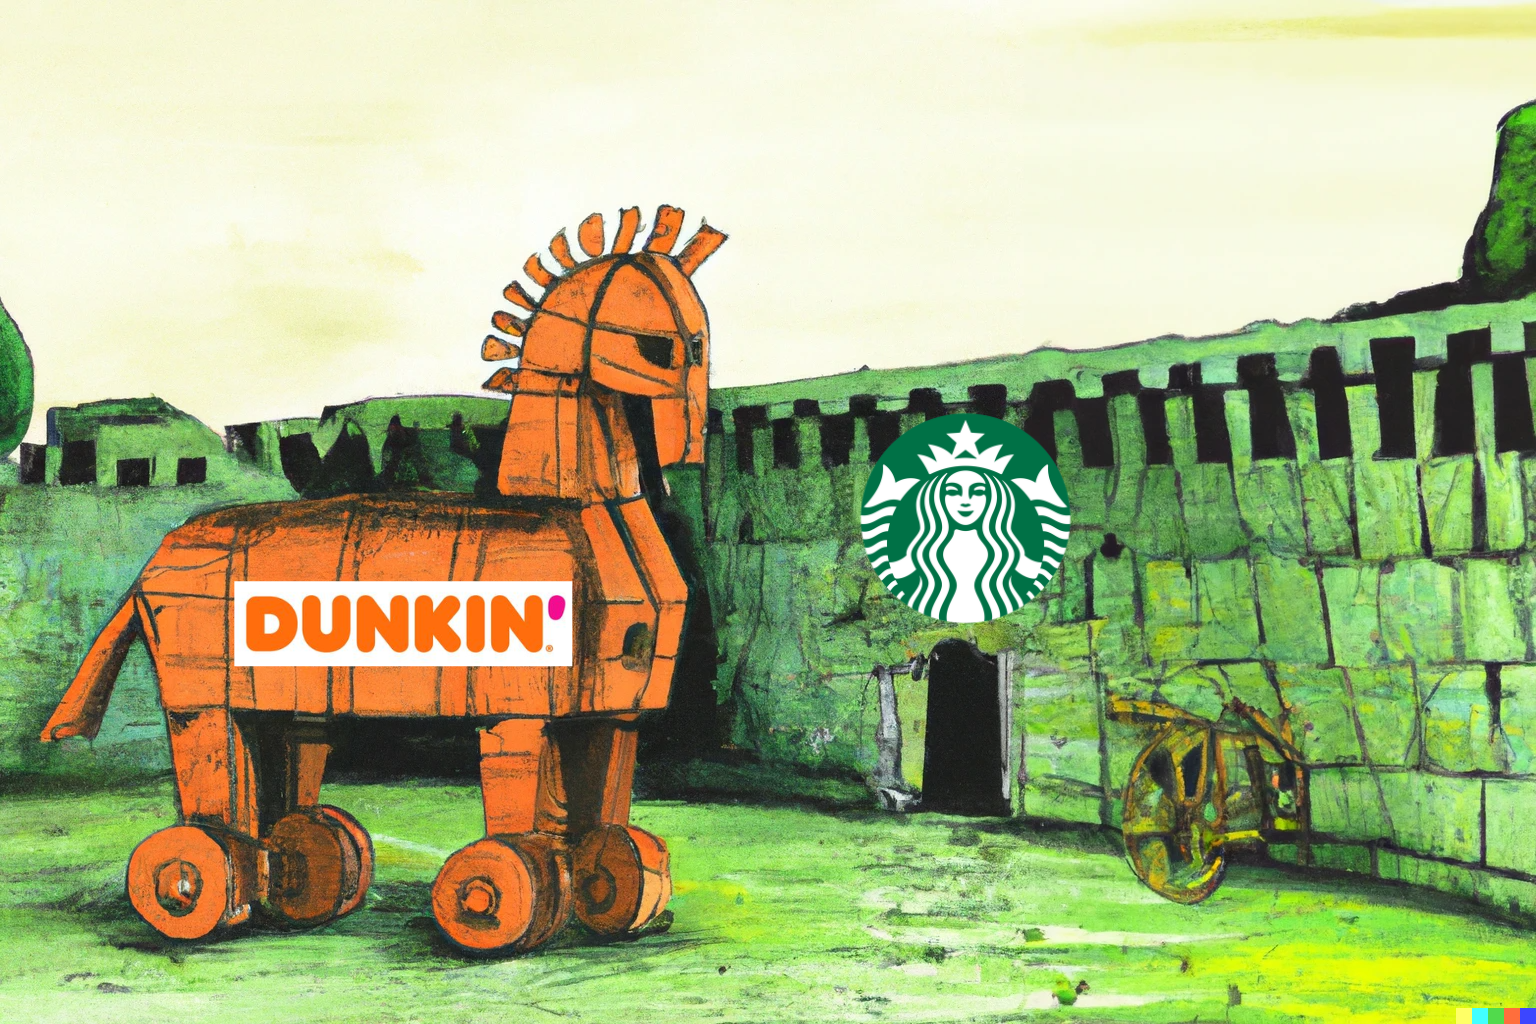 It's a giant wooden horse filled with coffee and donuts — what could go wrong?!